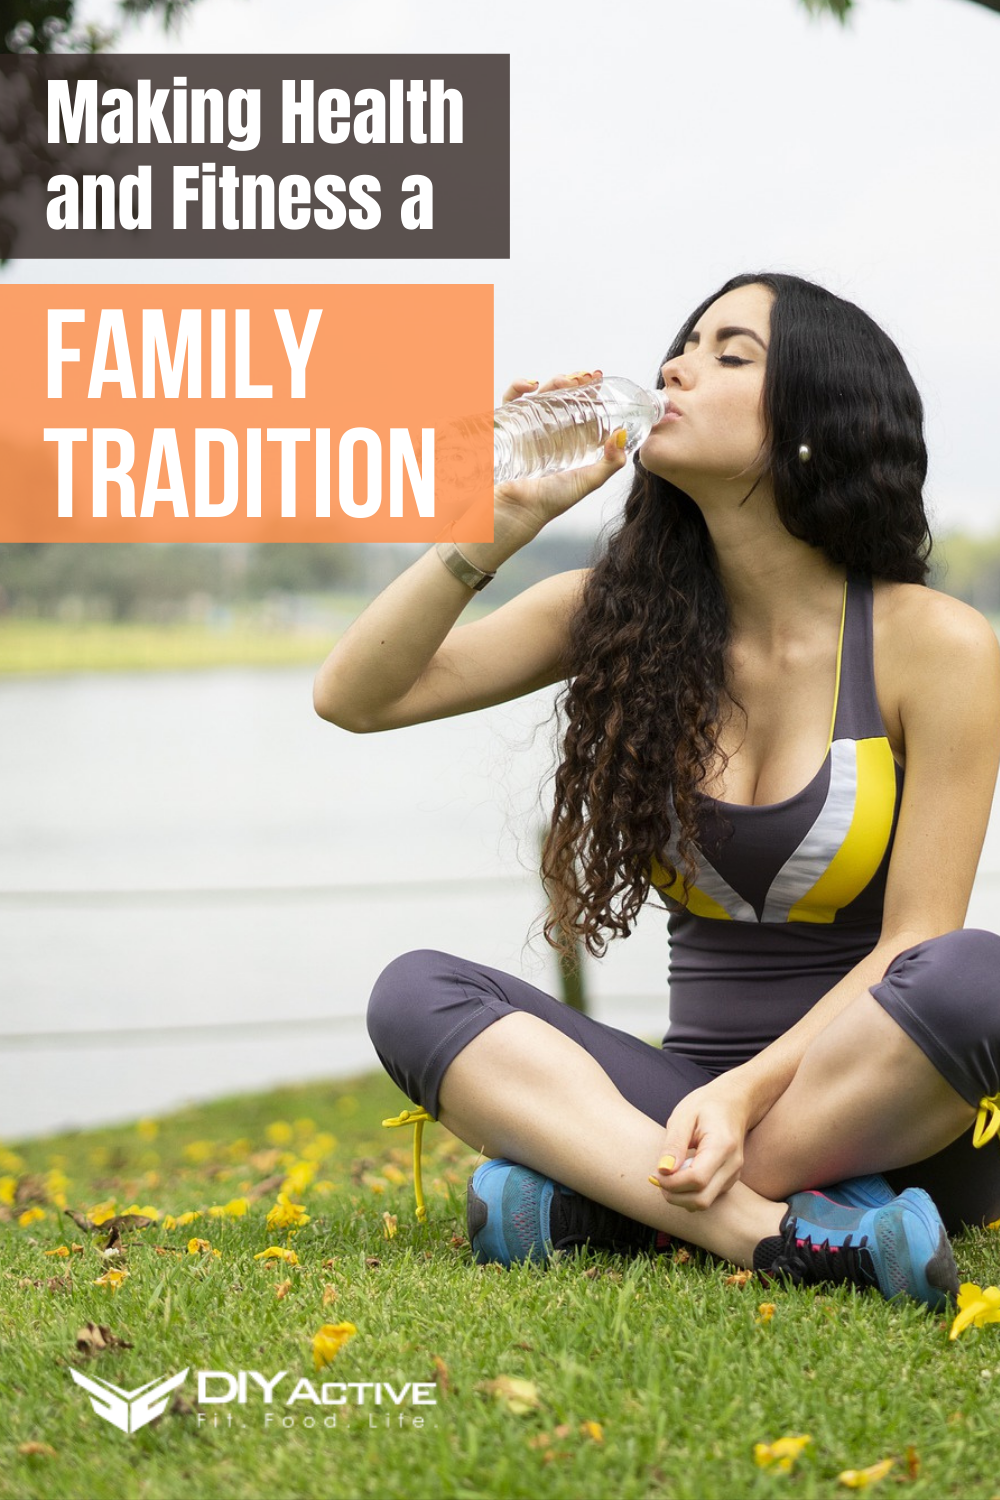 Making Health and Fitness a Family Tradition